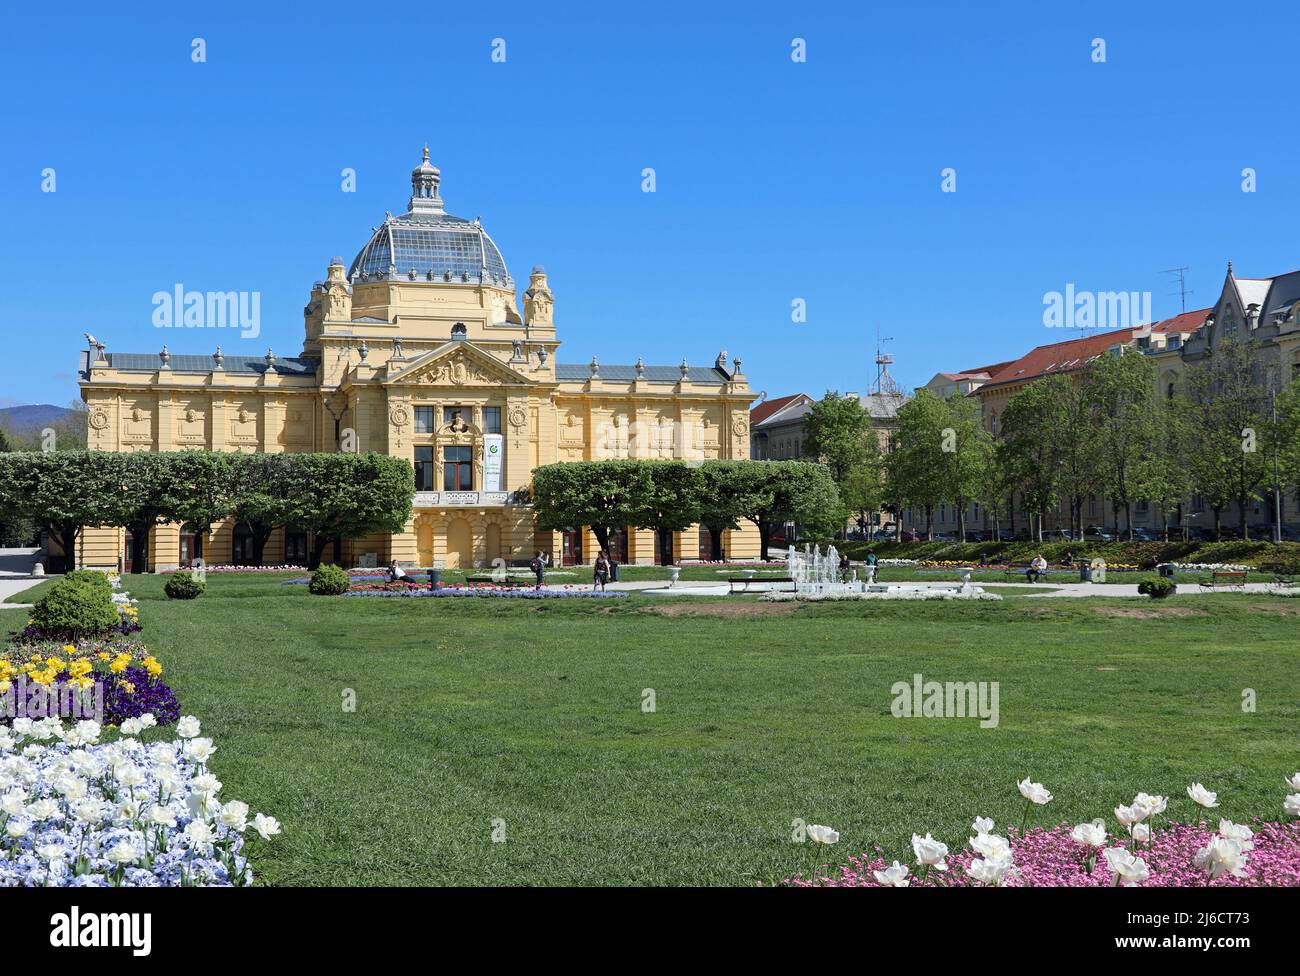 Zagreb Art Pavilion in the Lower Town Stock Photo